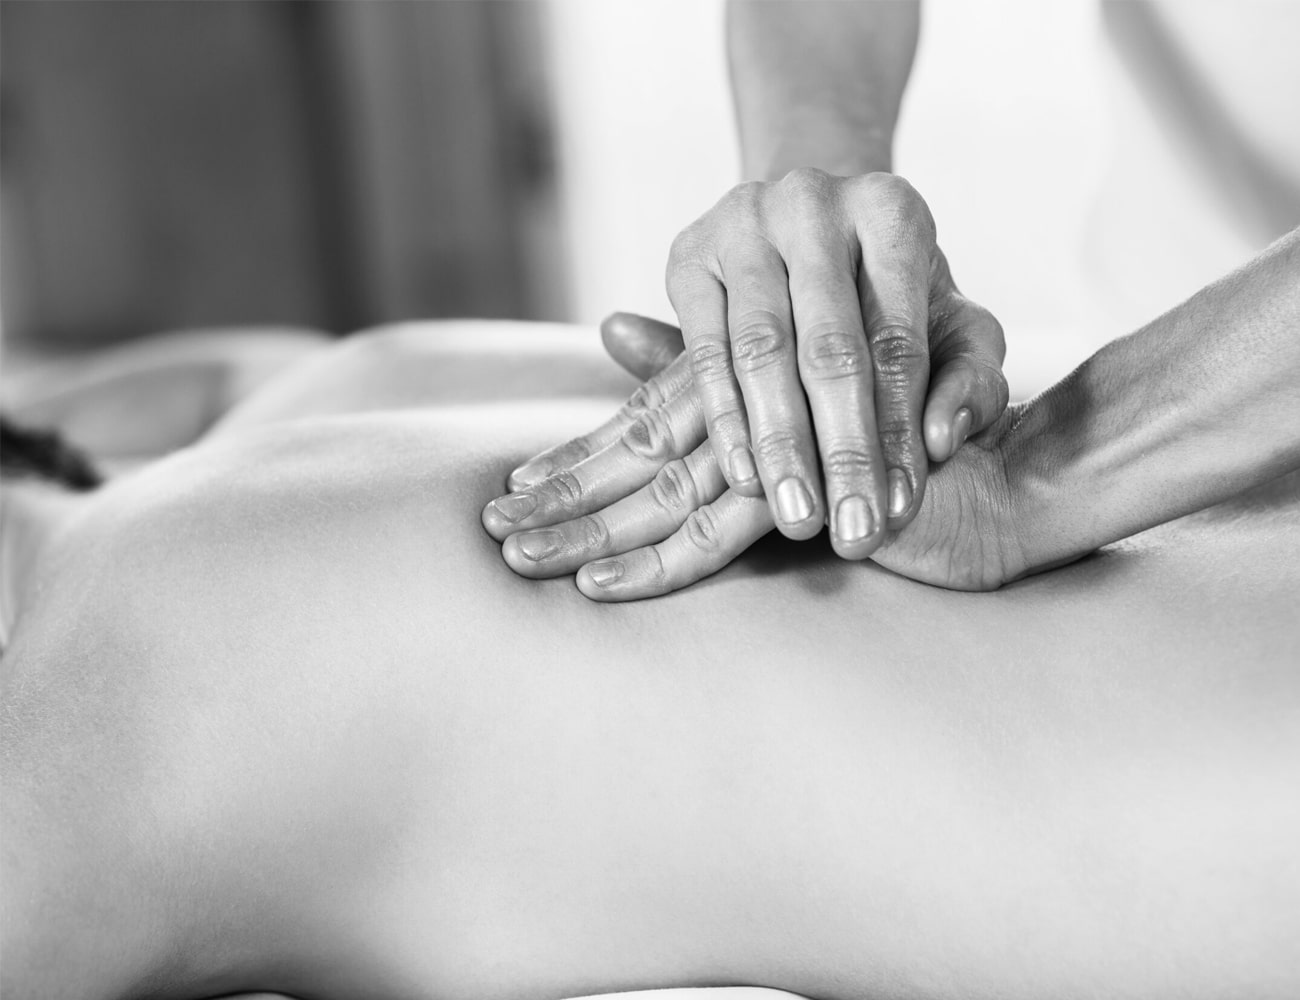 A Woman Receiving Massage Therapy